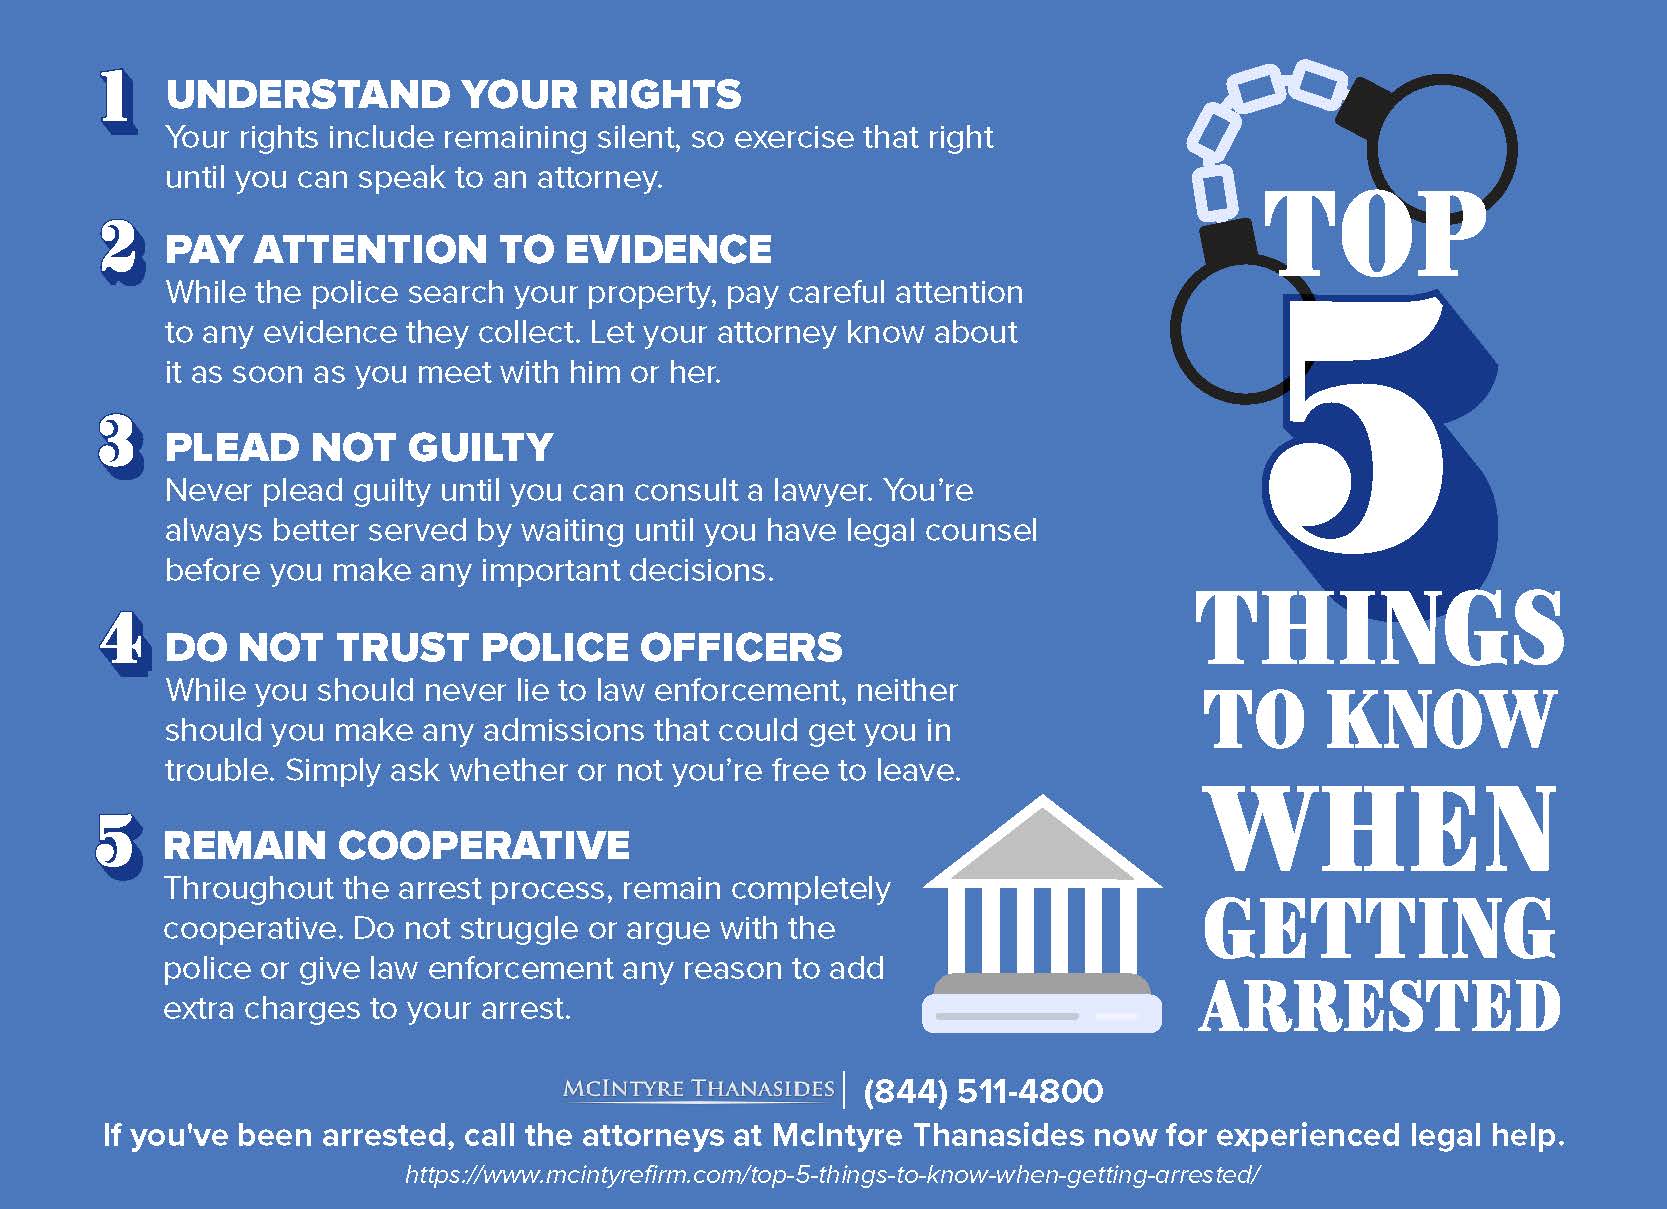 Top 5 Things to Know When Getting Arrested (Infographic)